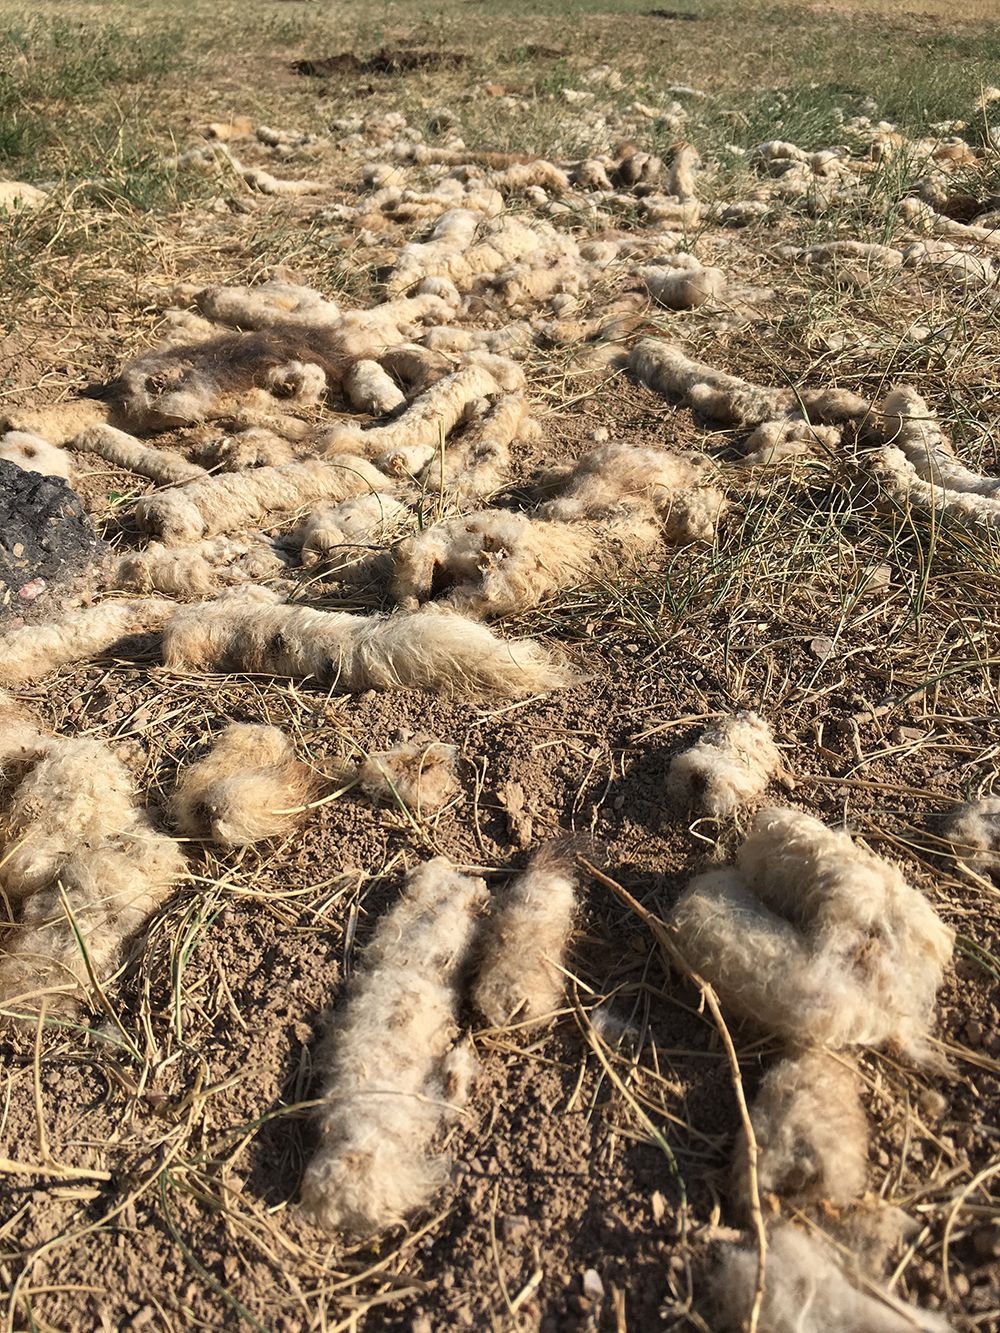 Sheared off lamb tails by the side of the road.